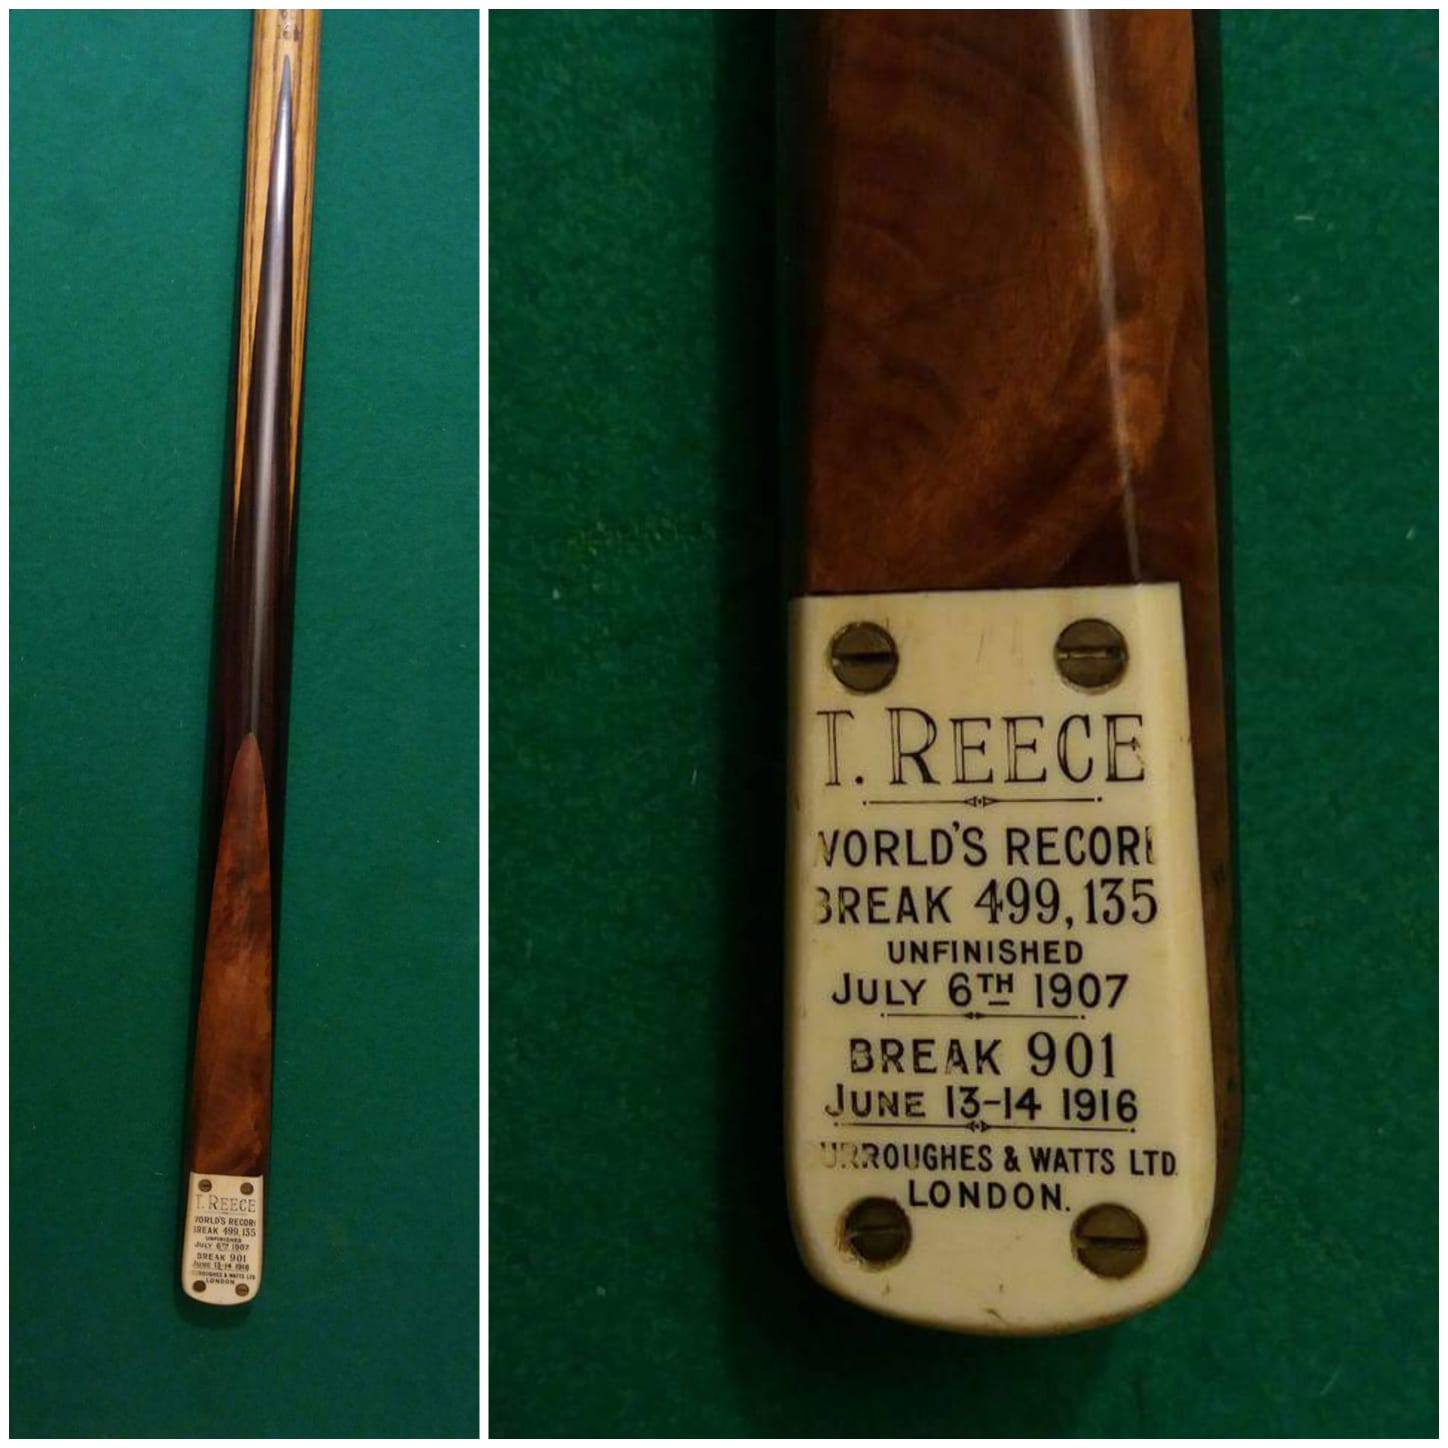 T Reece Worlds Record 1916 cue